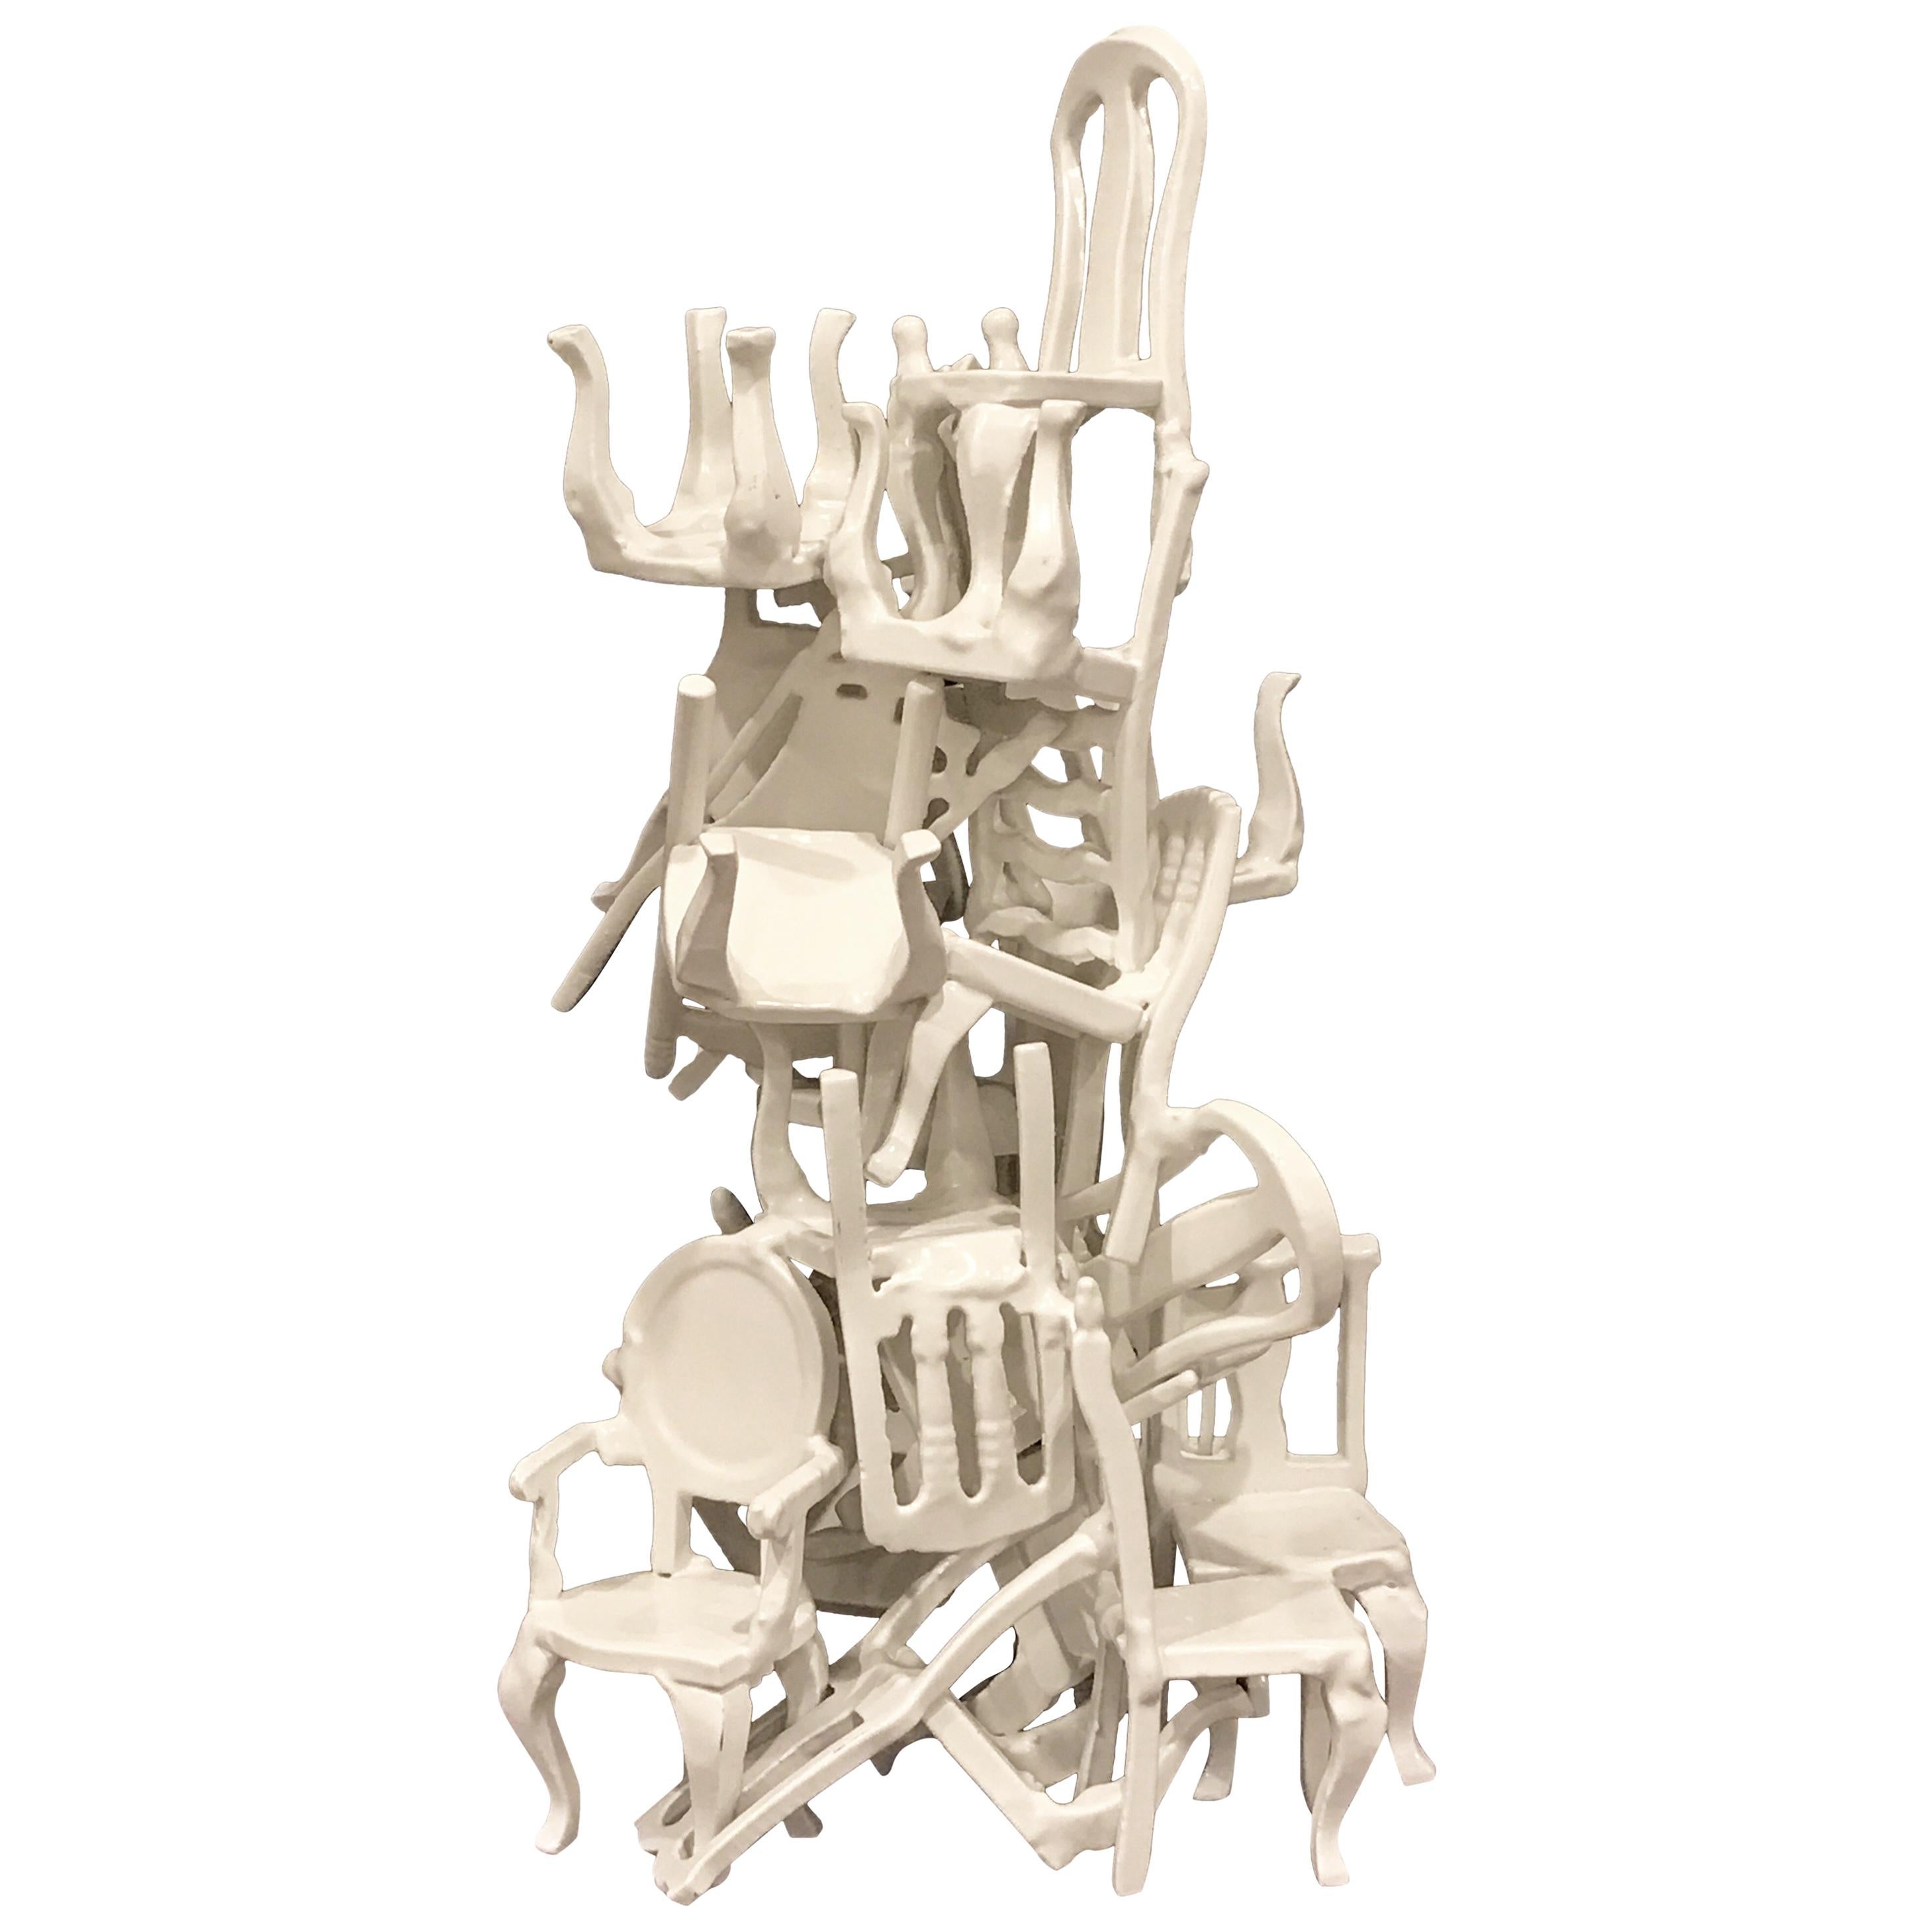 Midcentury Stacking Vintage Chairs Sculpture For Sale